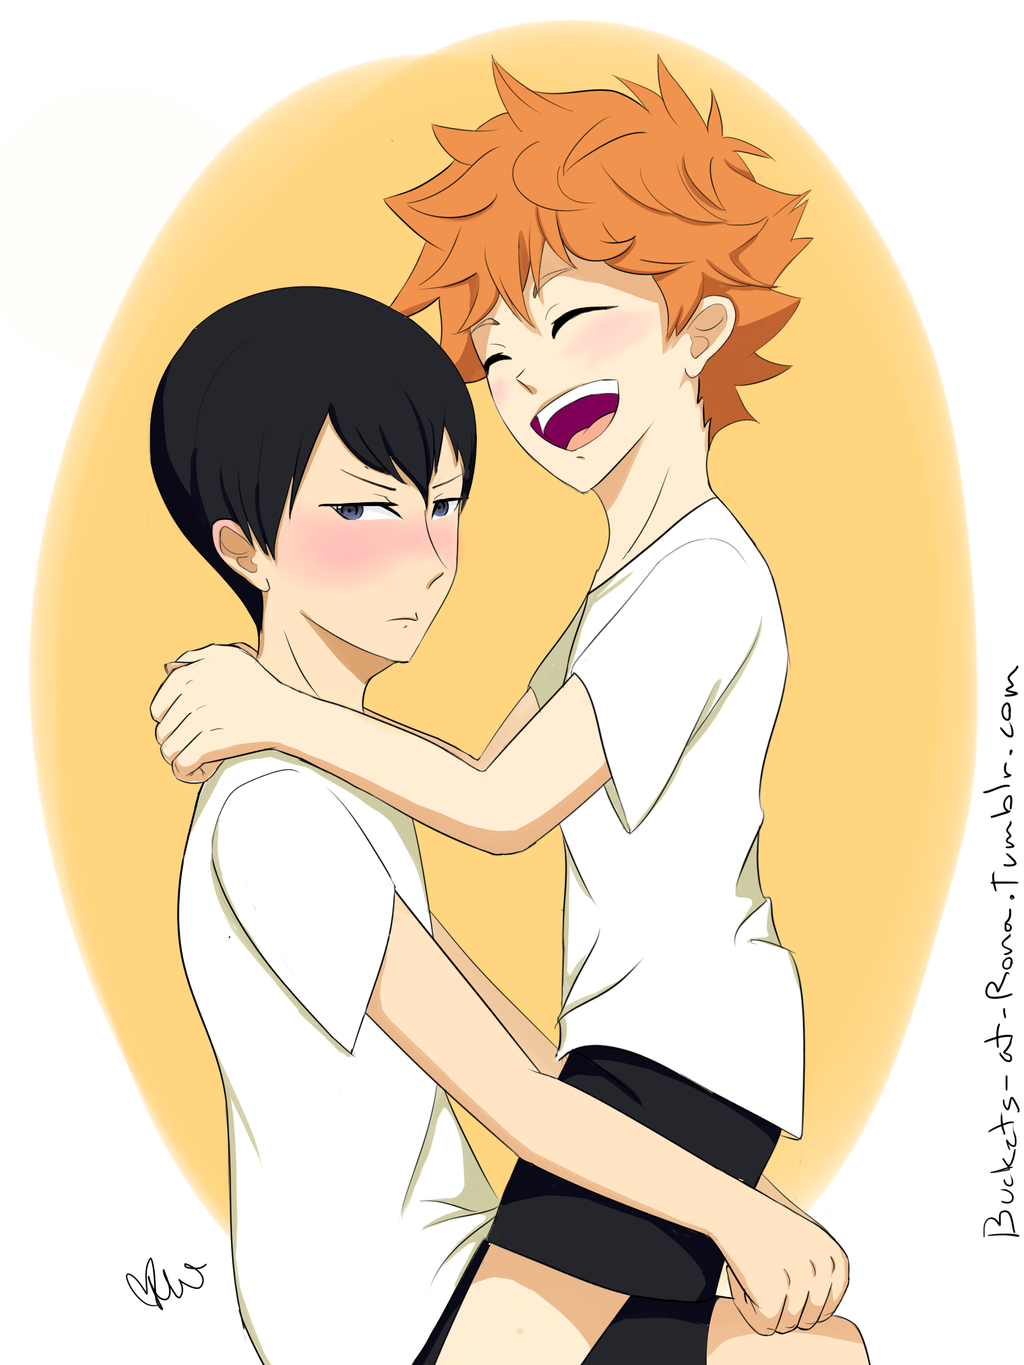 wimp☀️ — kagehina whisper challenge~! link to the video